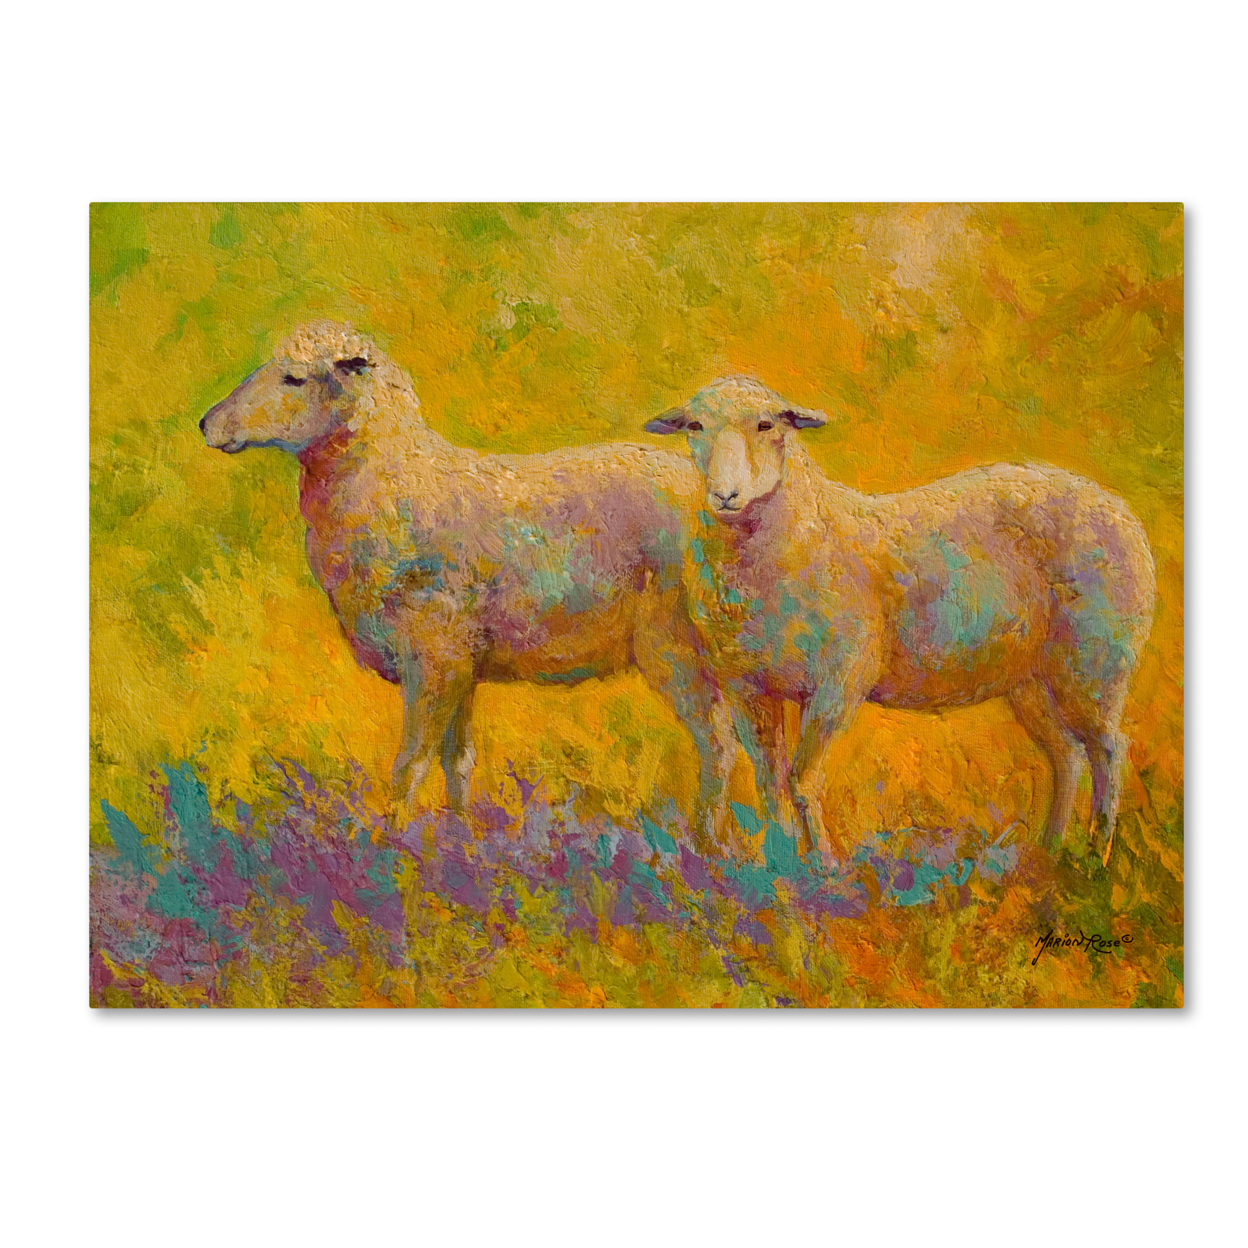 Marion Rose 'Warm Glow Sheep Pair' Ready To Hang Canvas Art 24 X 32 Inches Made In USA